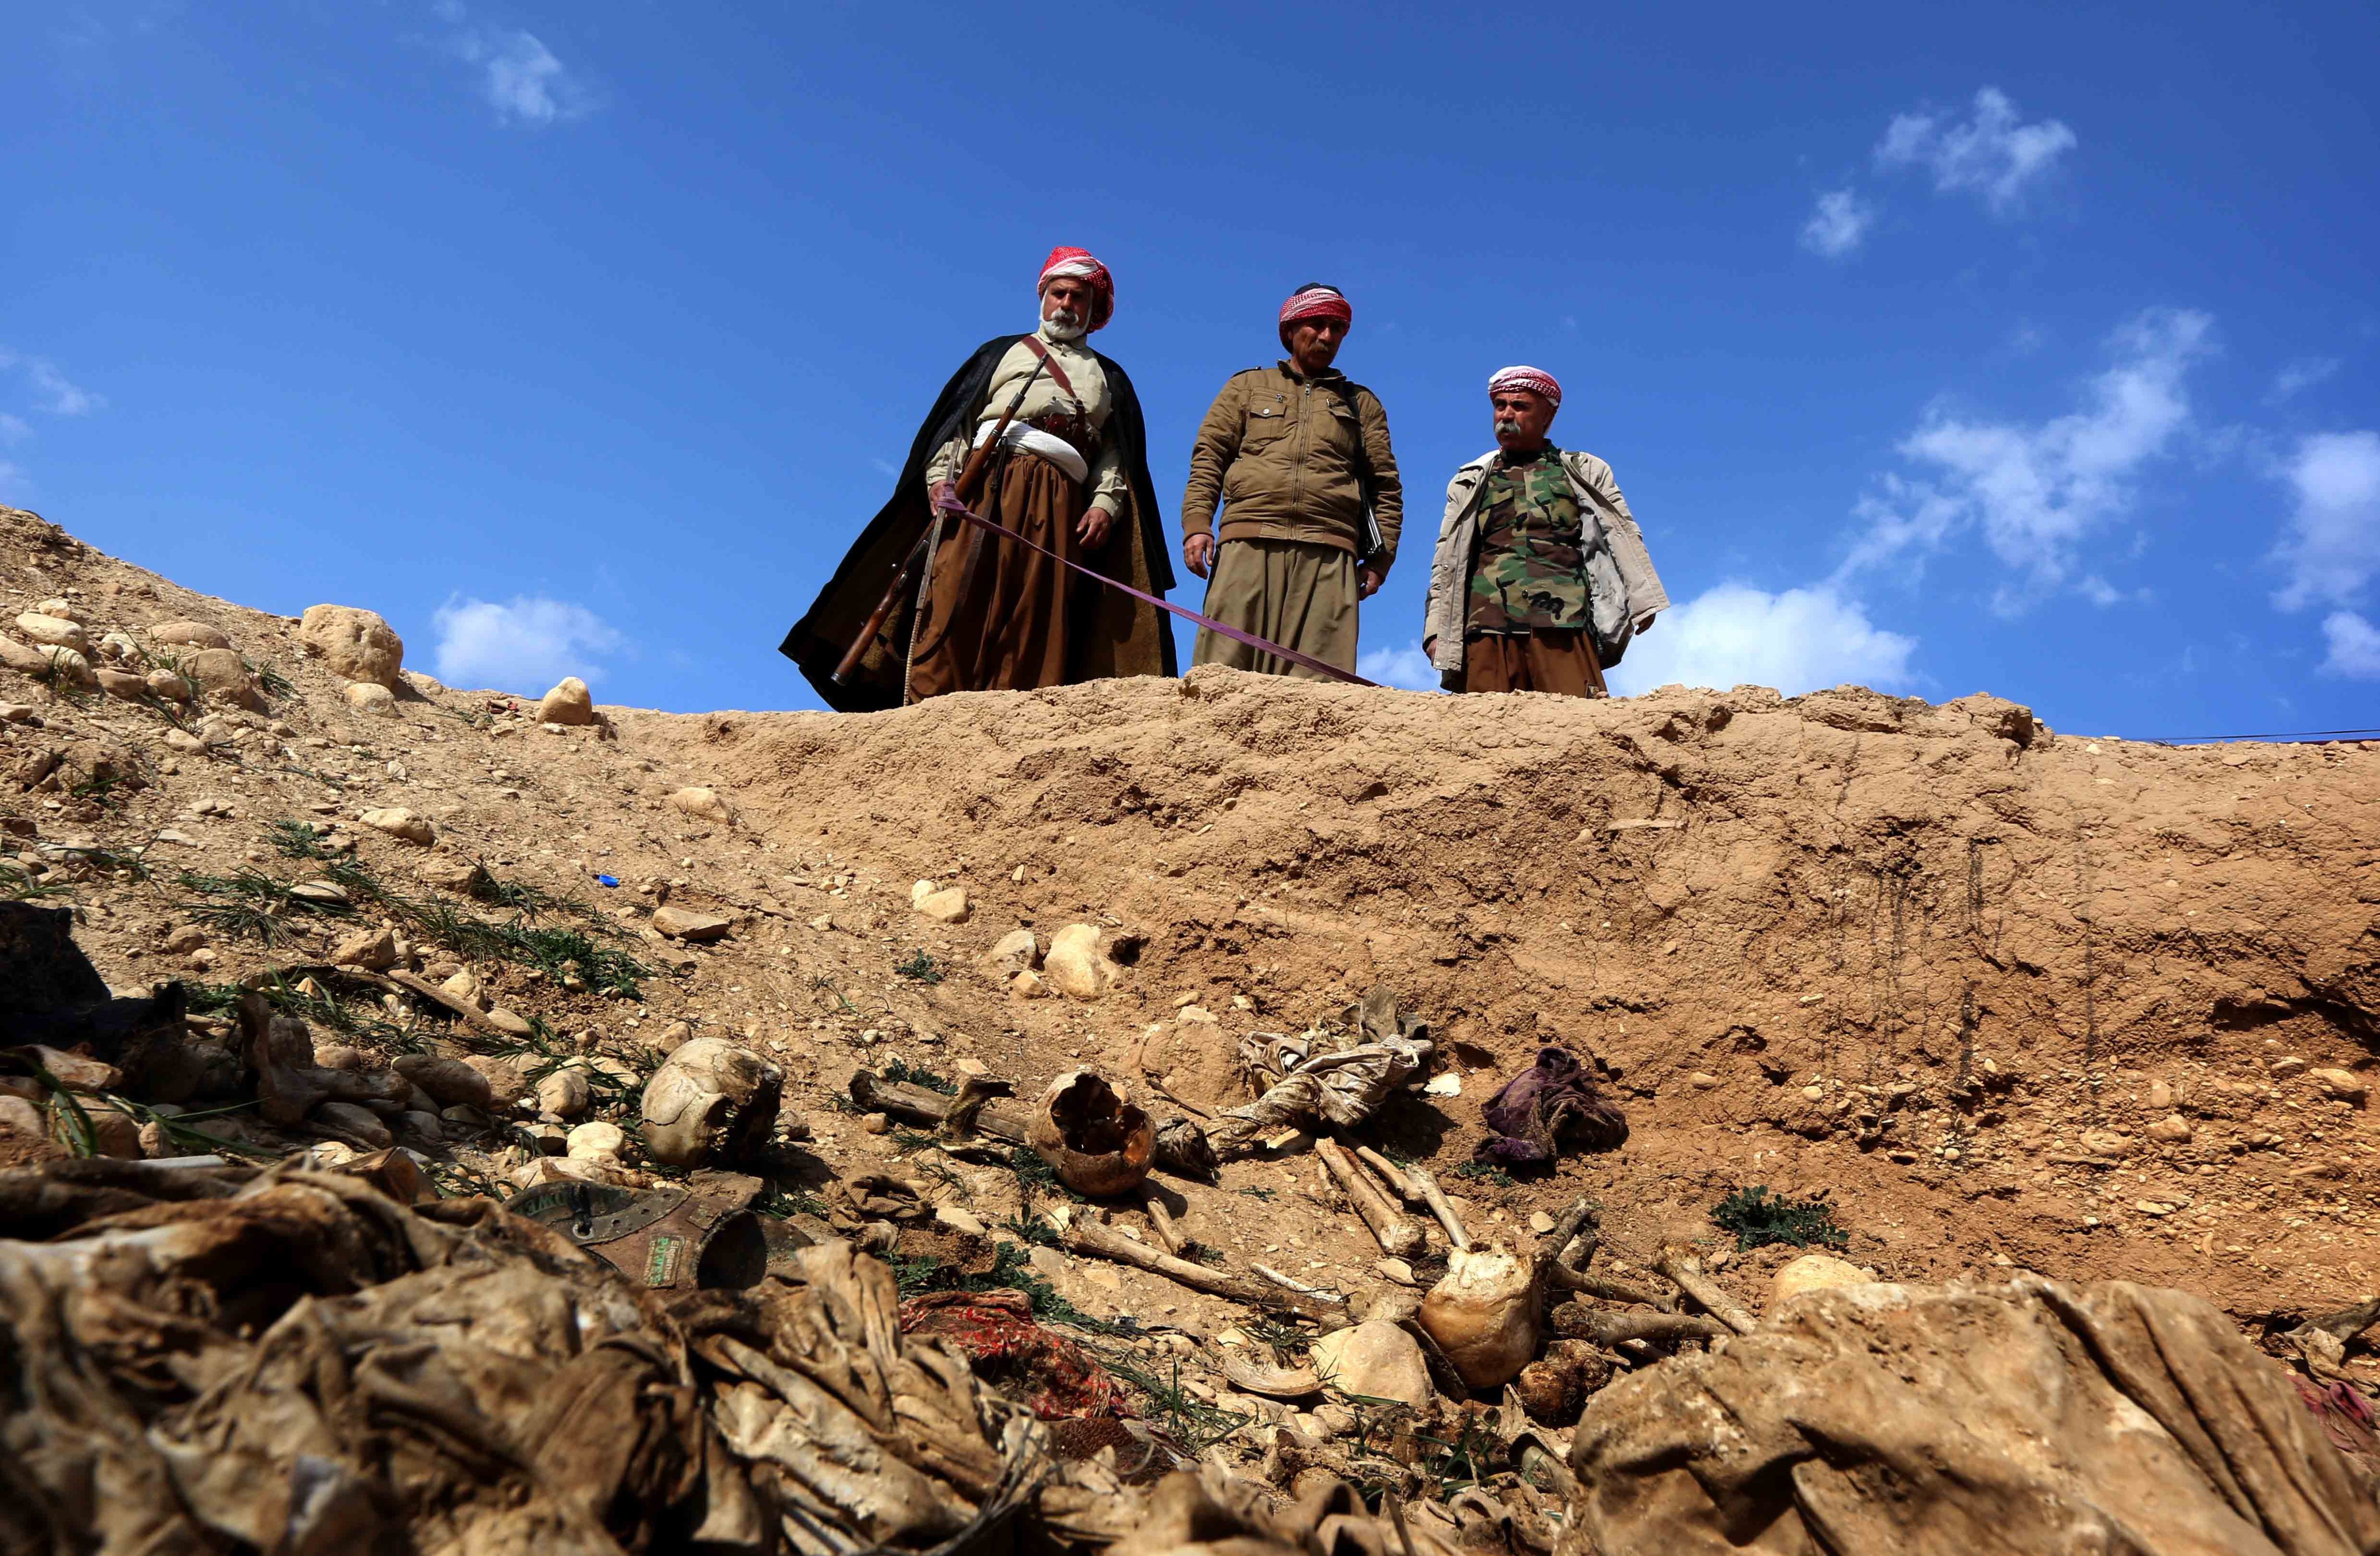 Members of the Yazidi minority search for clues on February 3, 2015, that might lead them to missing relatives in the remains of people killed by the Islamic State (IS) jihadist group, a day after Kurdish forces discovered a mass grave near the Iraqi village of Sinuni, in the northwestern Sinjar area. (SAFIN HAMED—AFP/Getty Images)